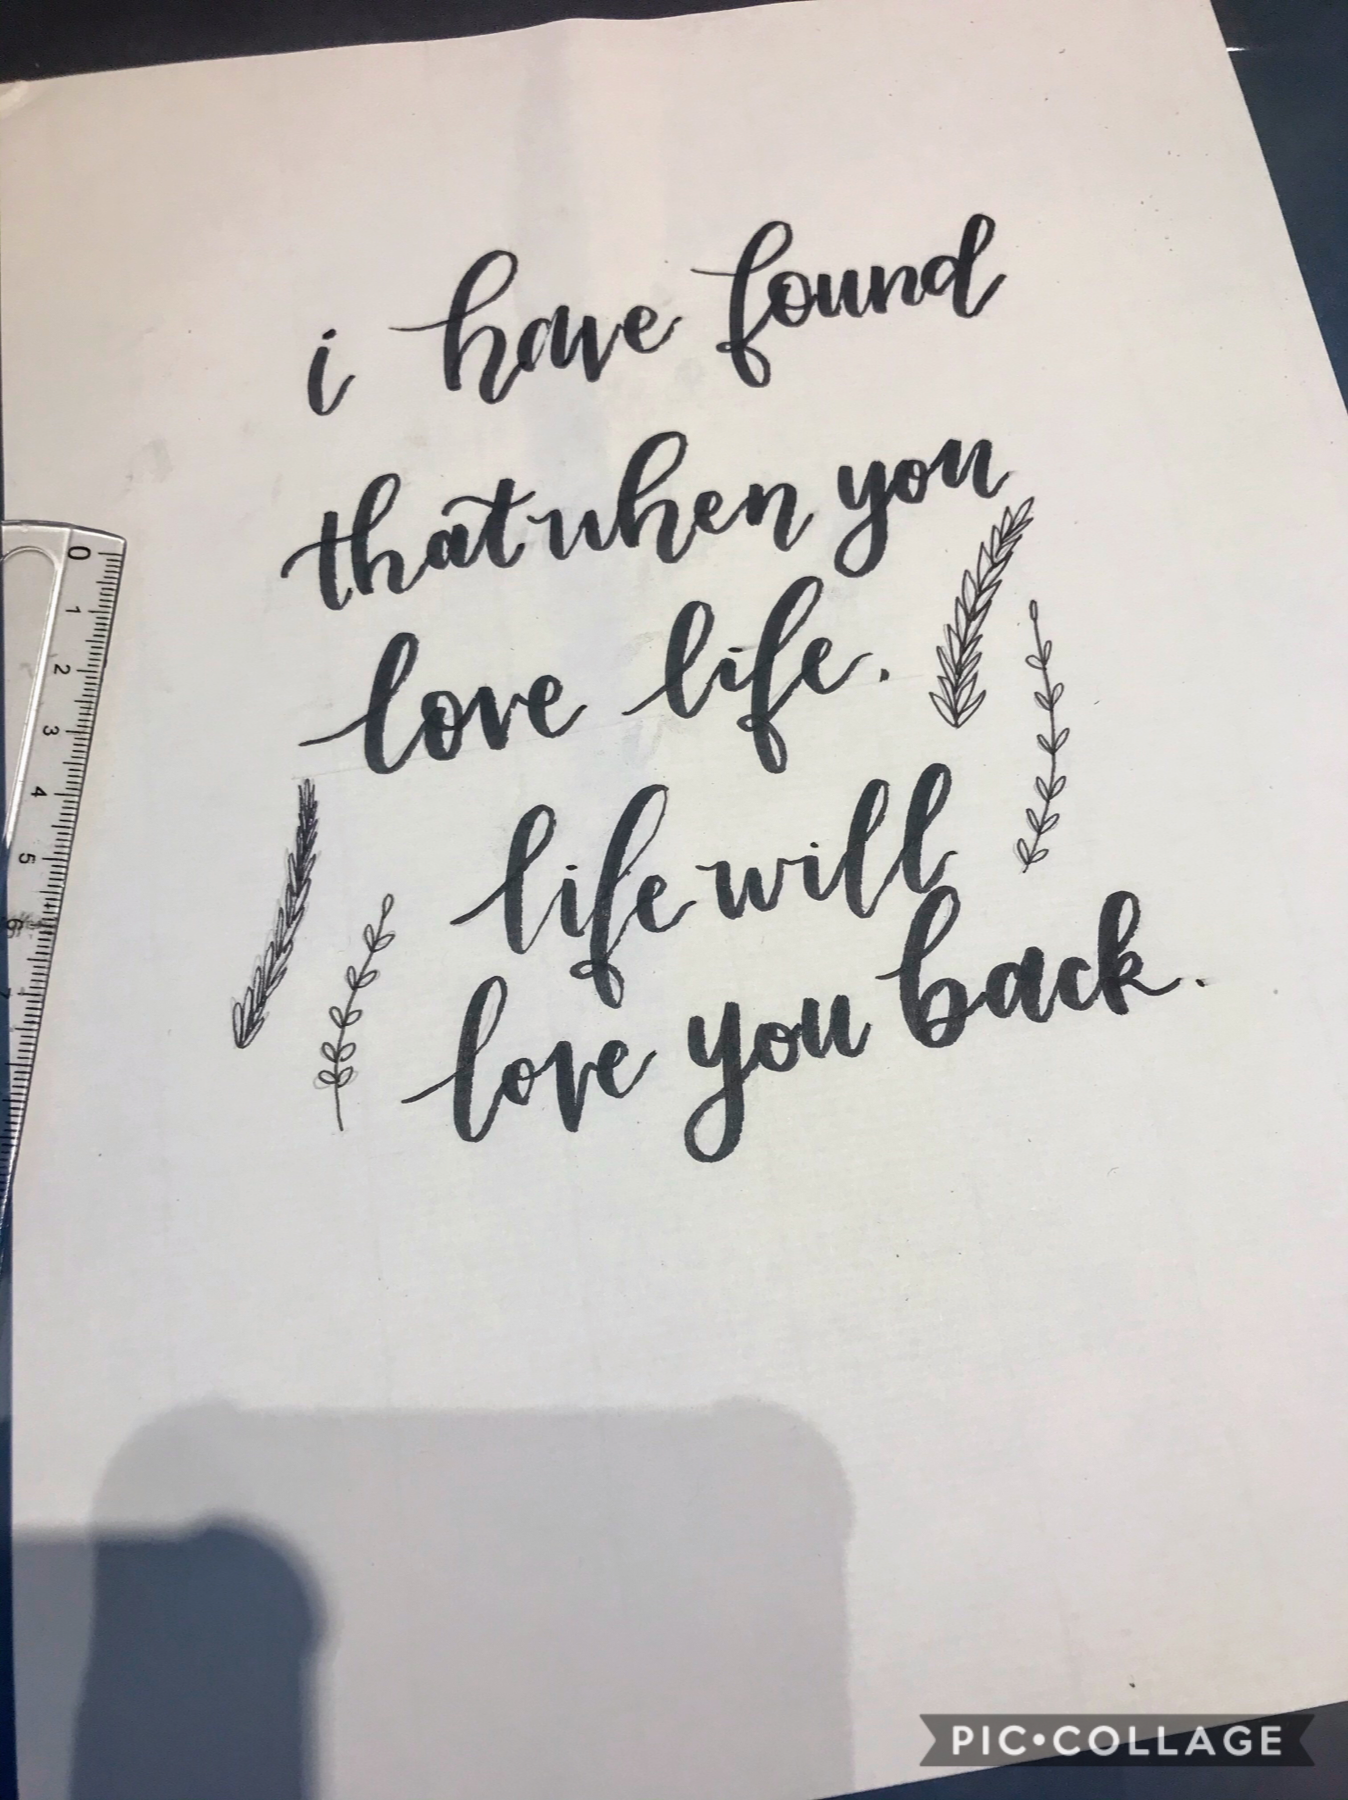 More hand lettering whoo. I’m bored, And have a poetry performance tomorrow that I’m not looking forward to. Sending my love 